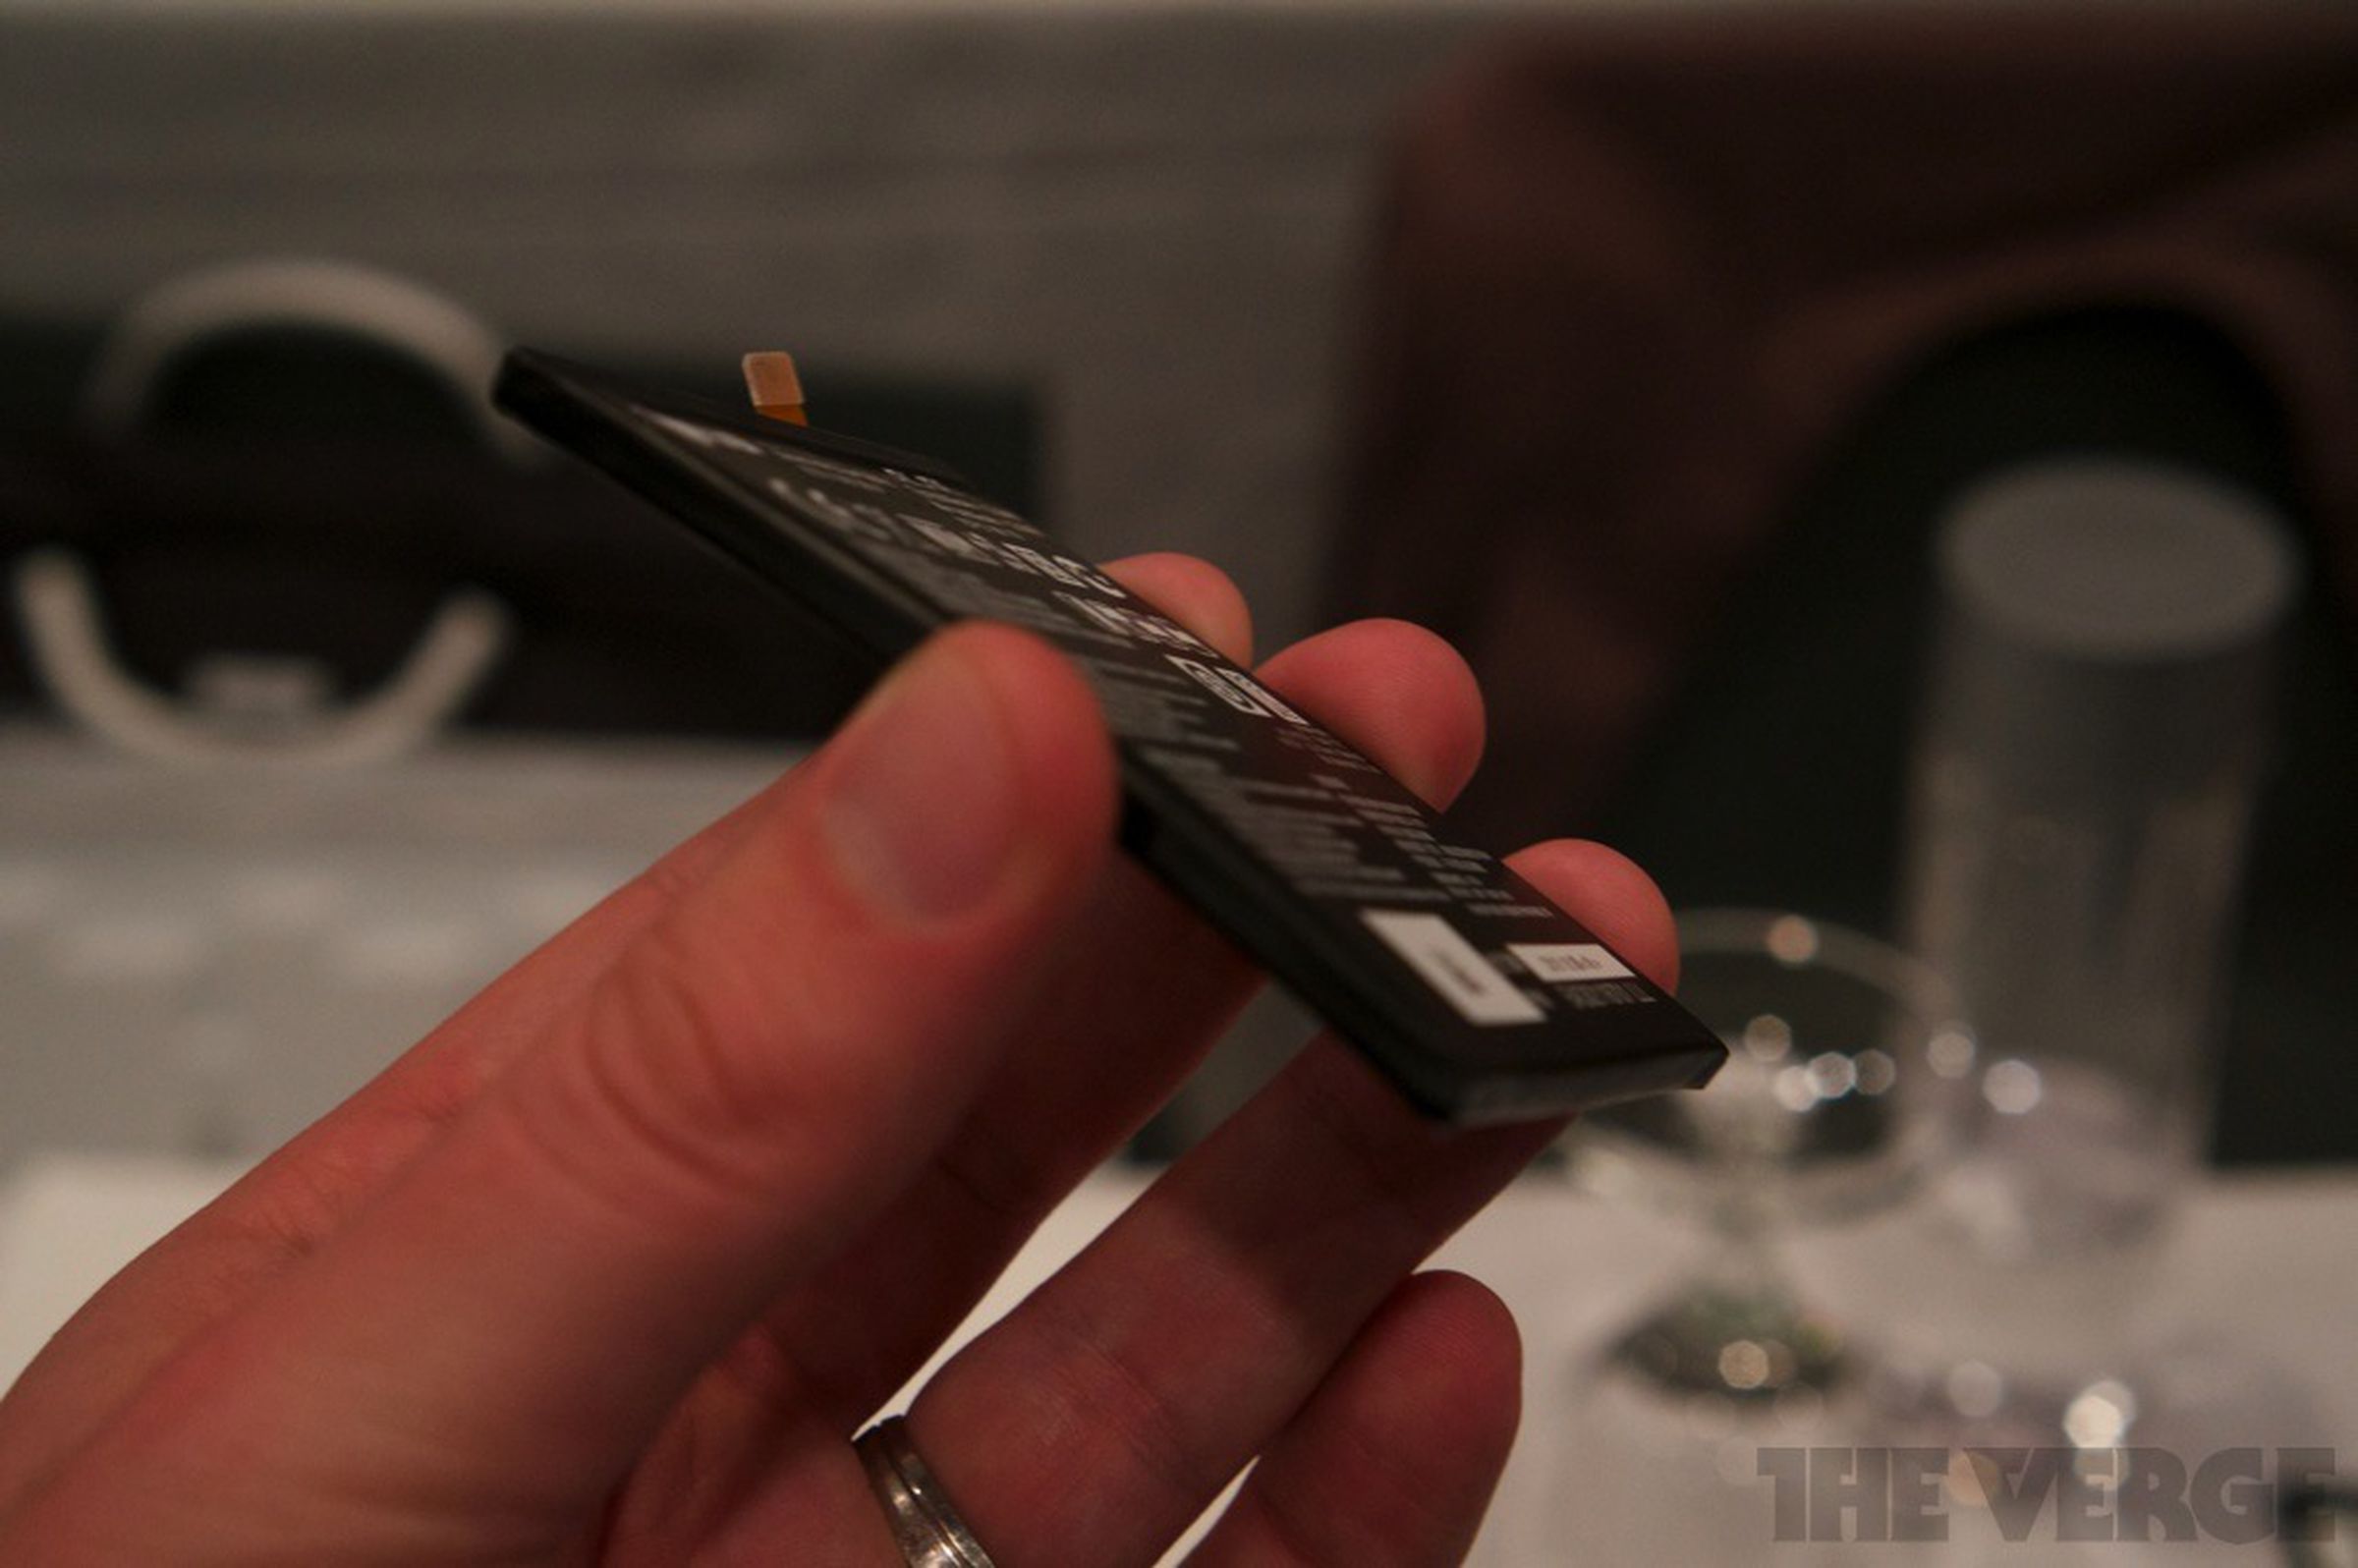 LG G-Flex and components hands-on photos